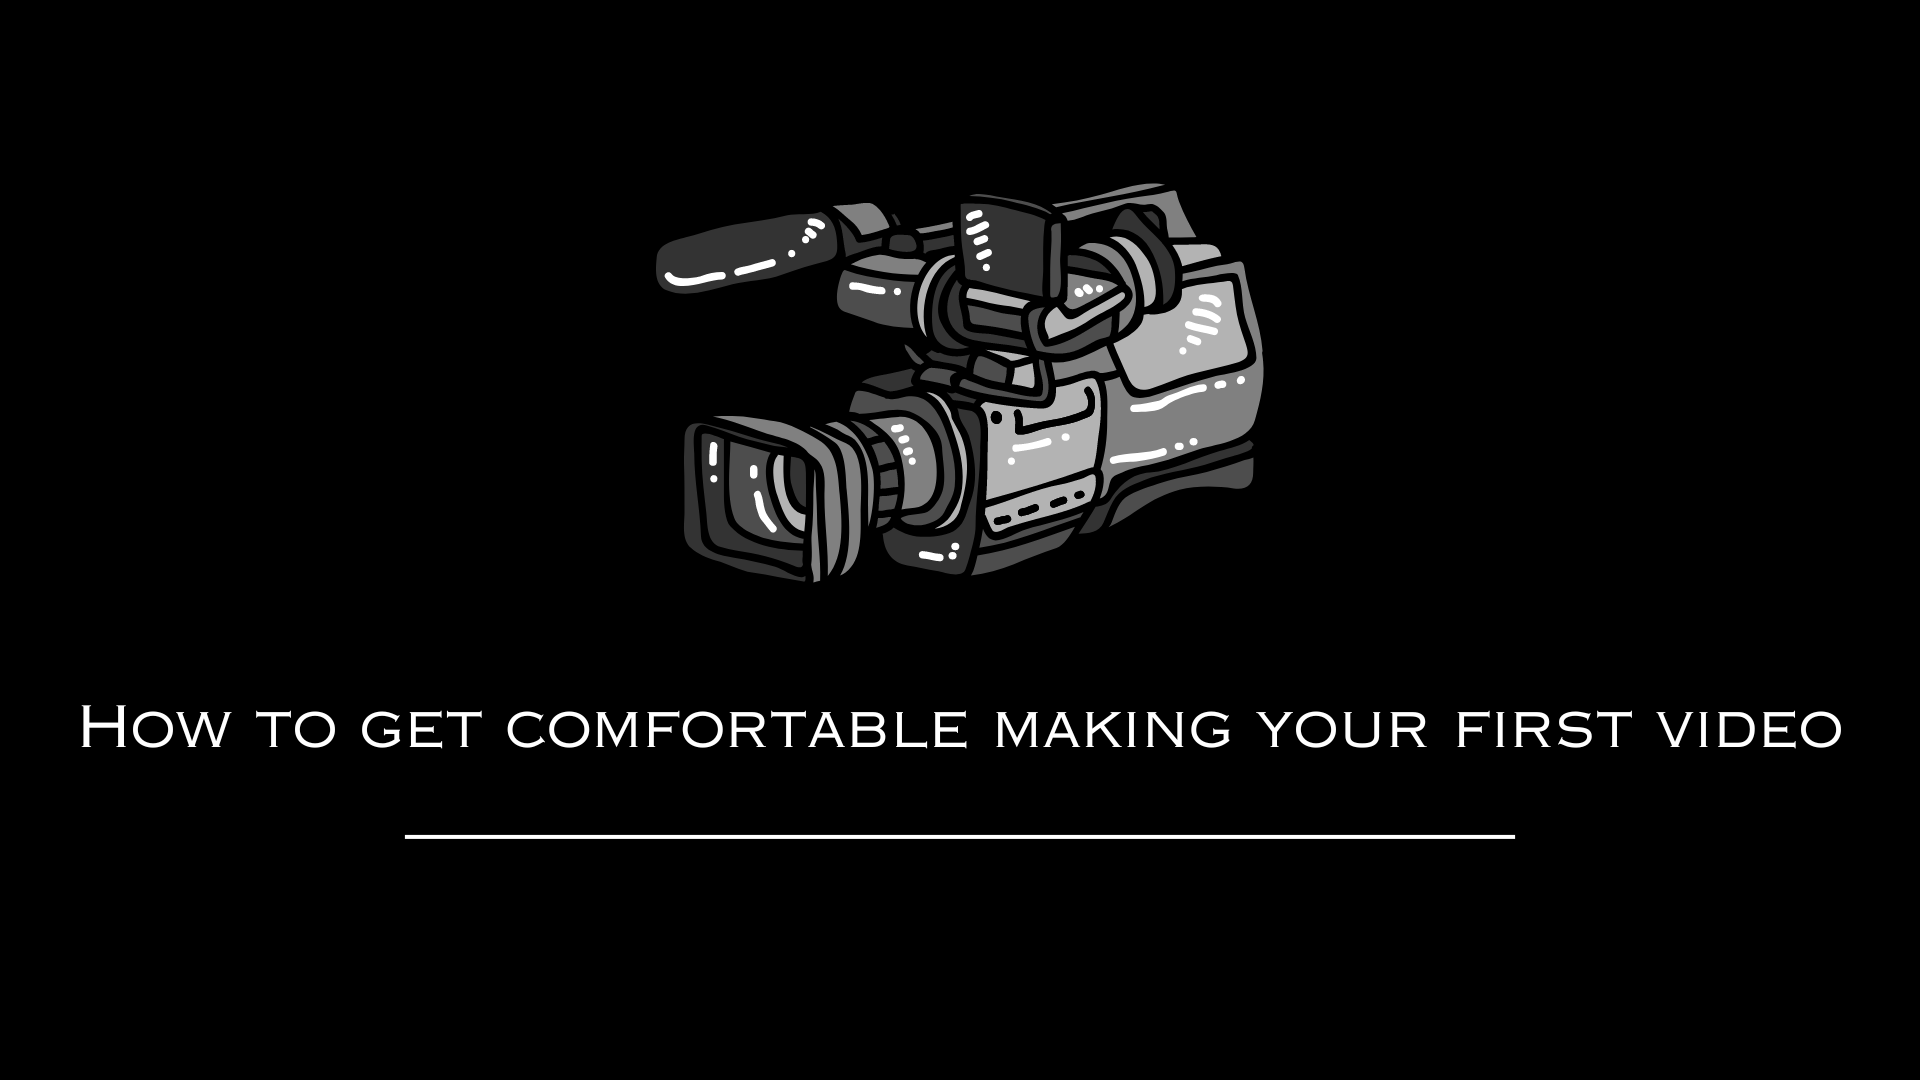 How to get comfortable making your first video